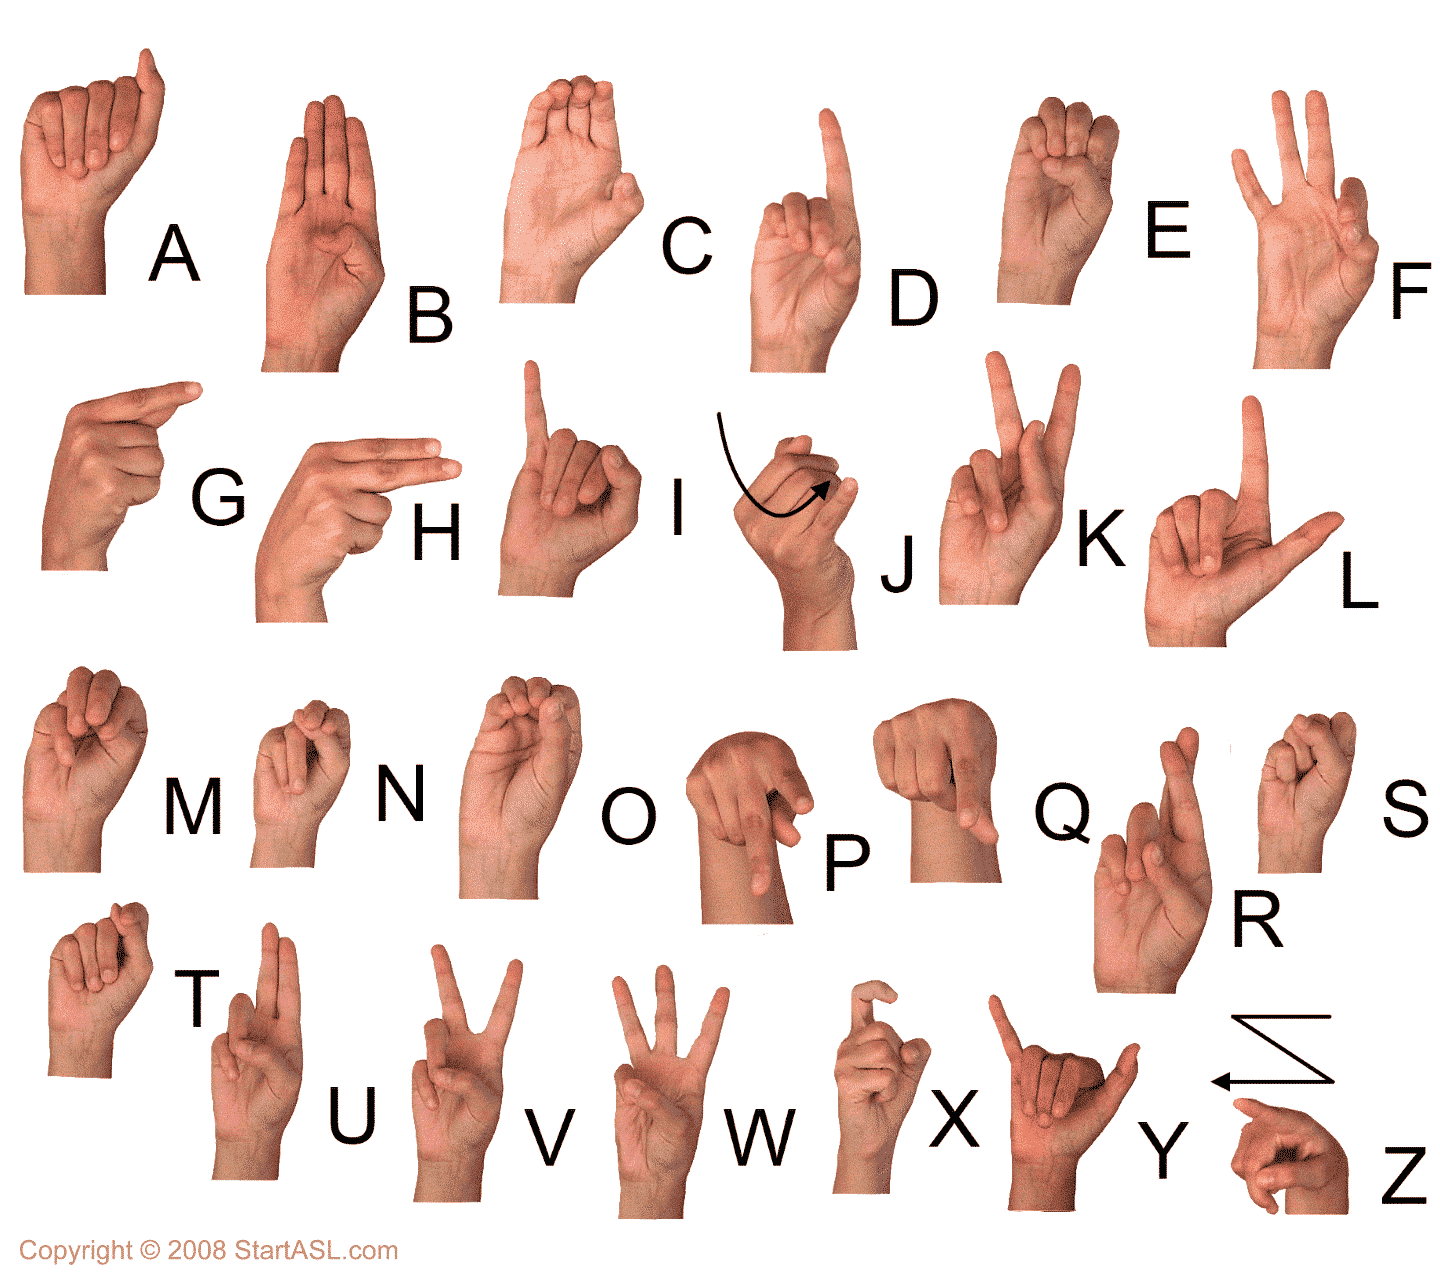 Sign Language Alphabet | 6 Free Downloads to Learn It Fast - Start ASL